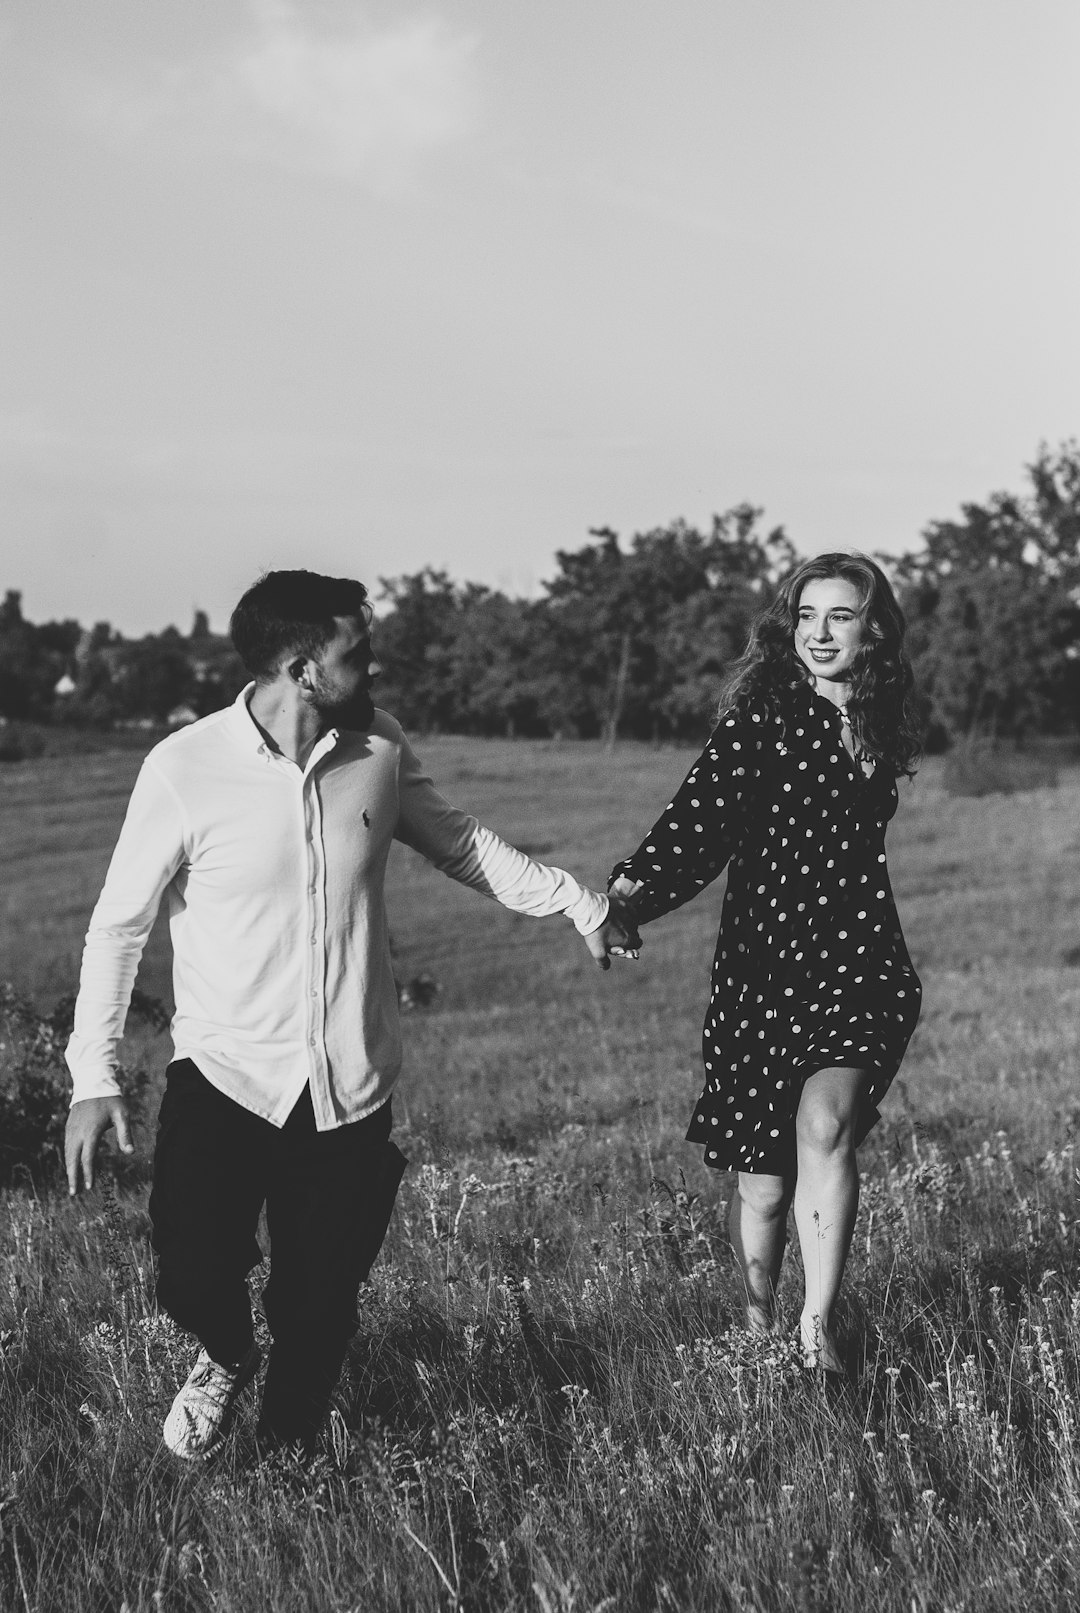 man and woman holding hands on grass field in grayscale photography